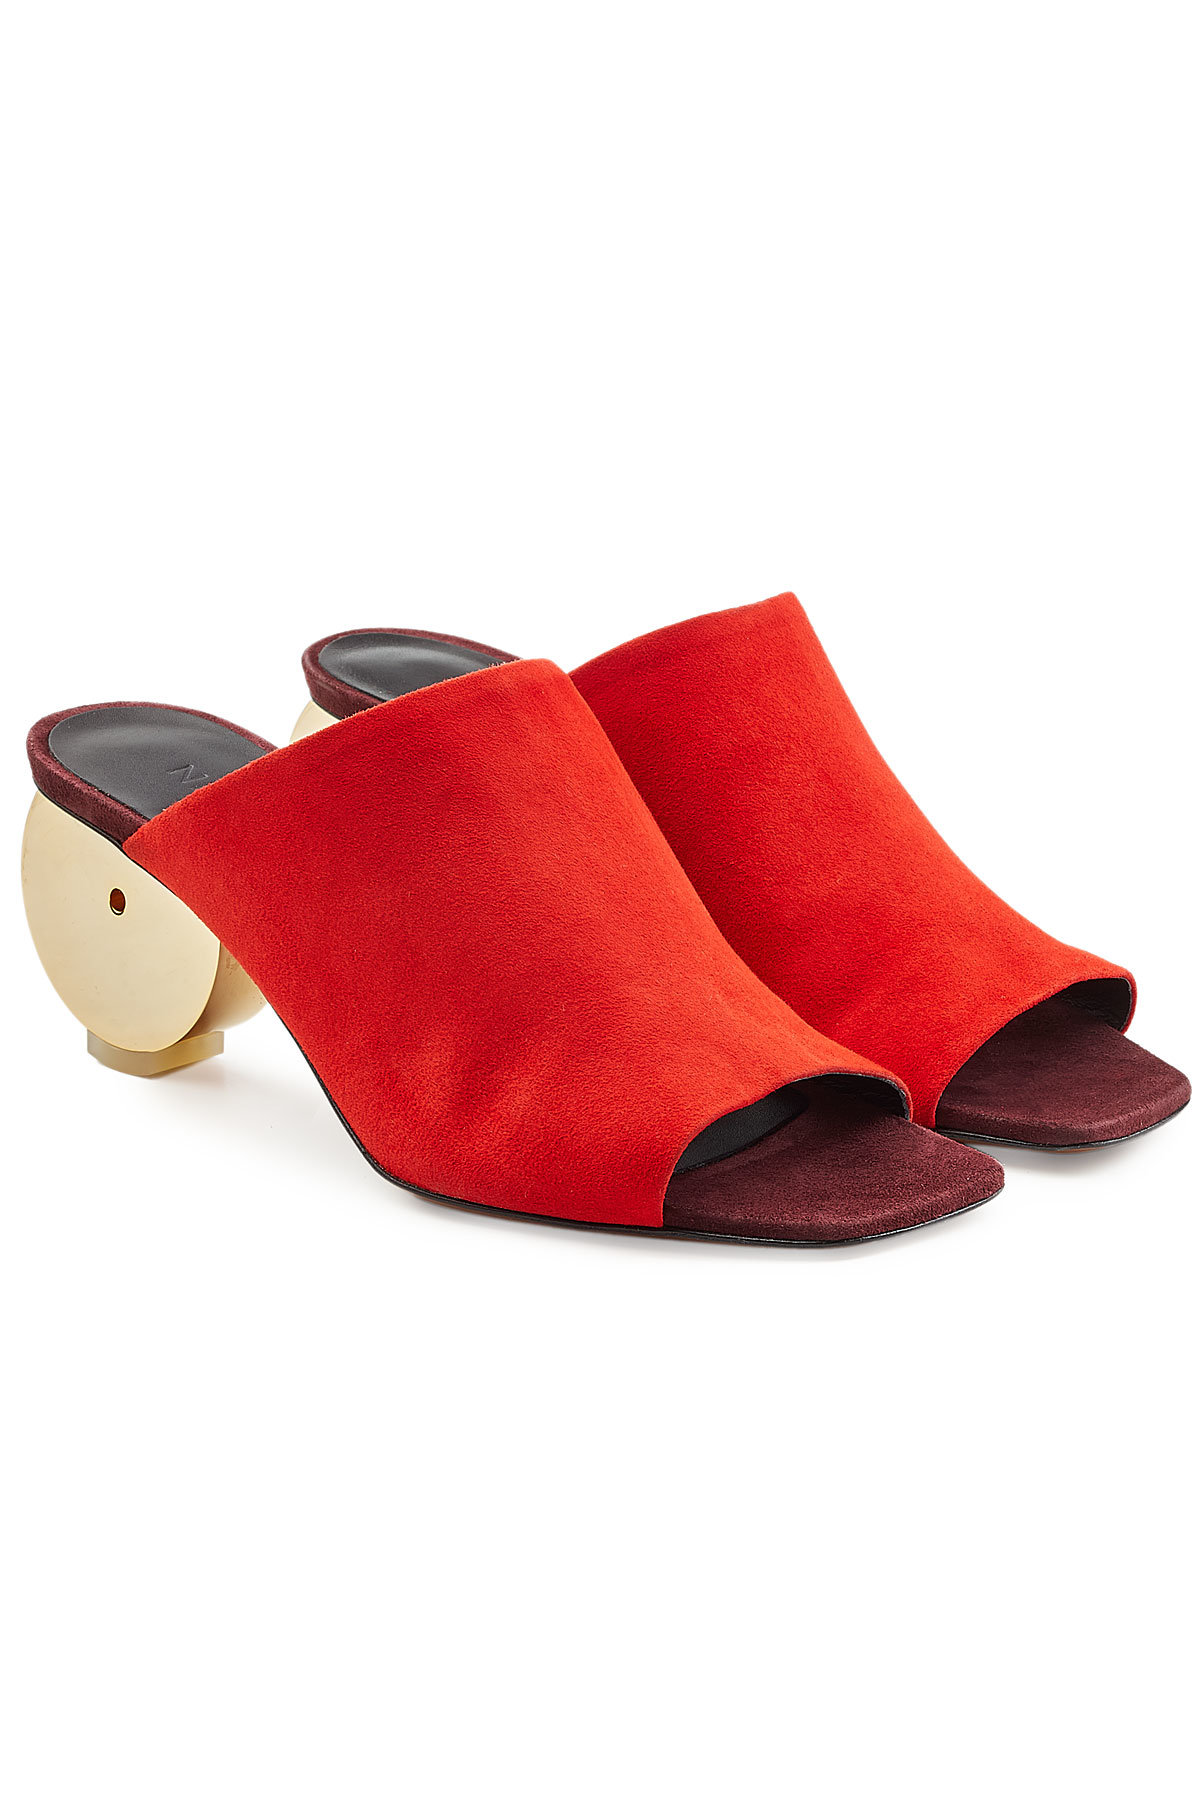 Gongoria Suede Sandals by Neous